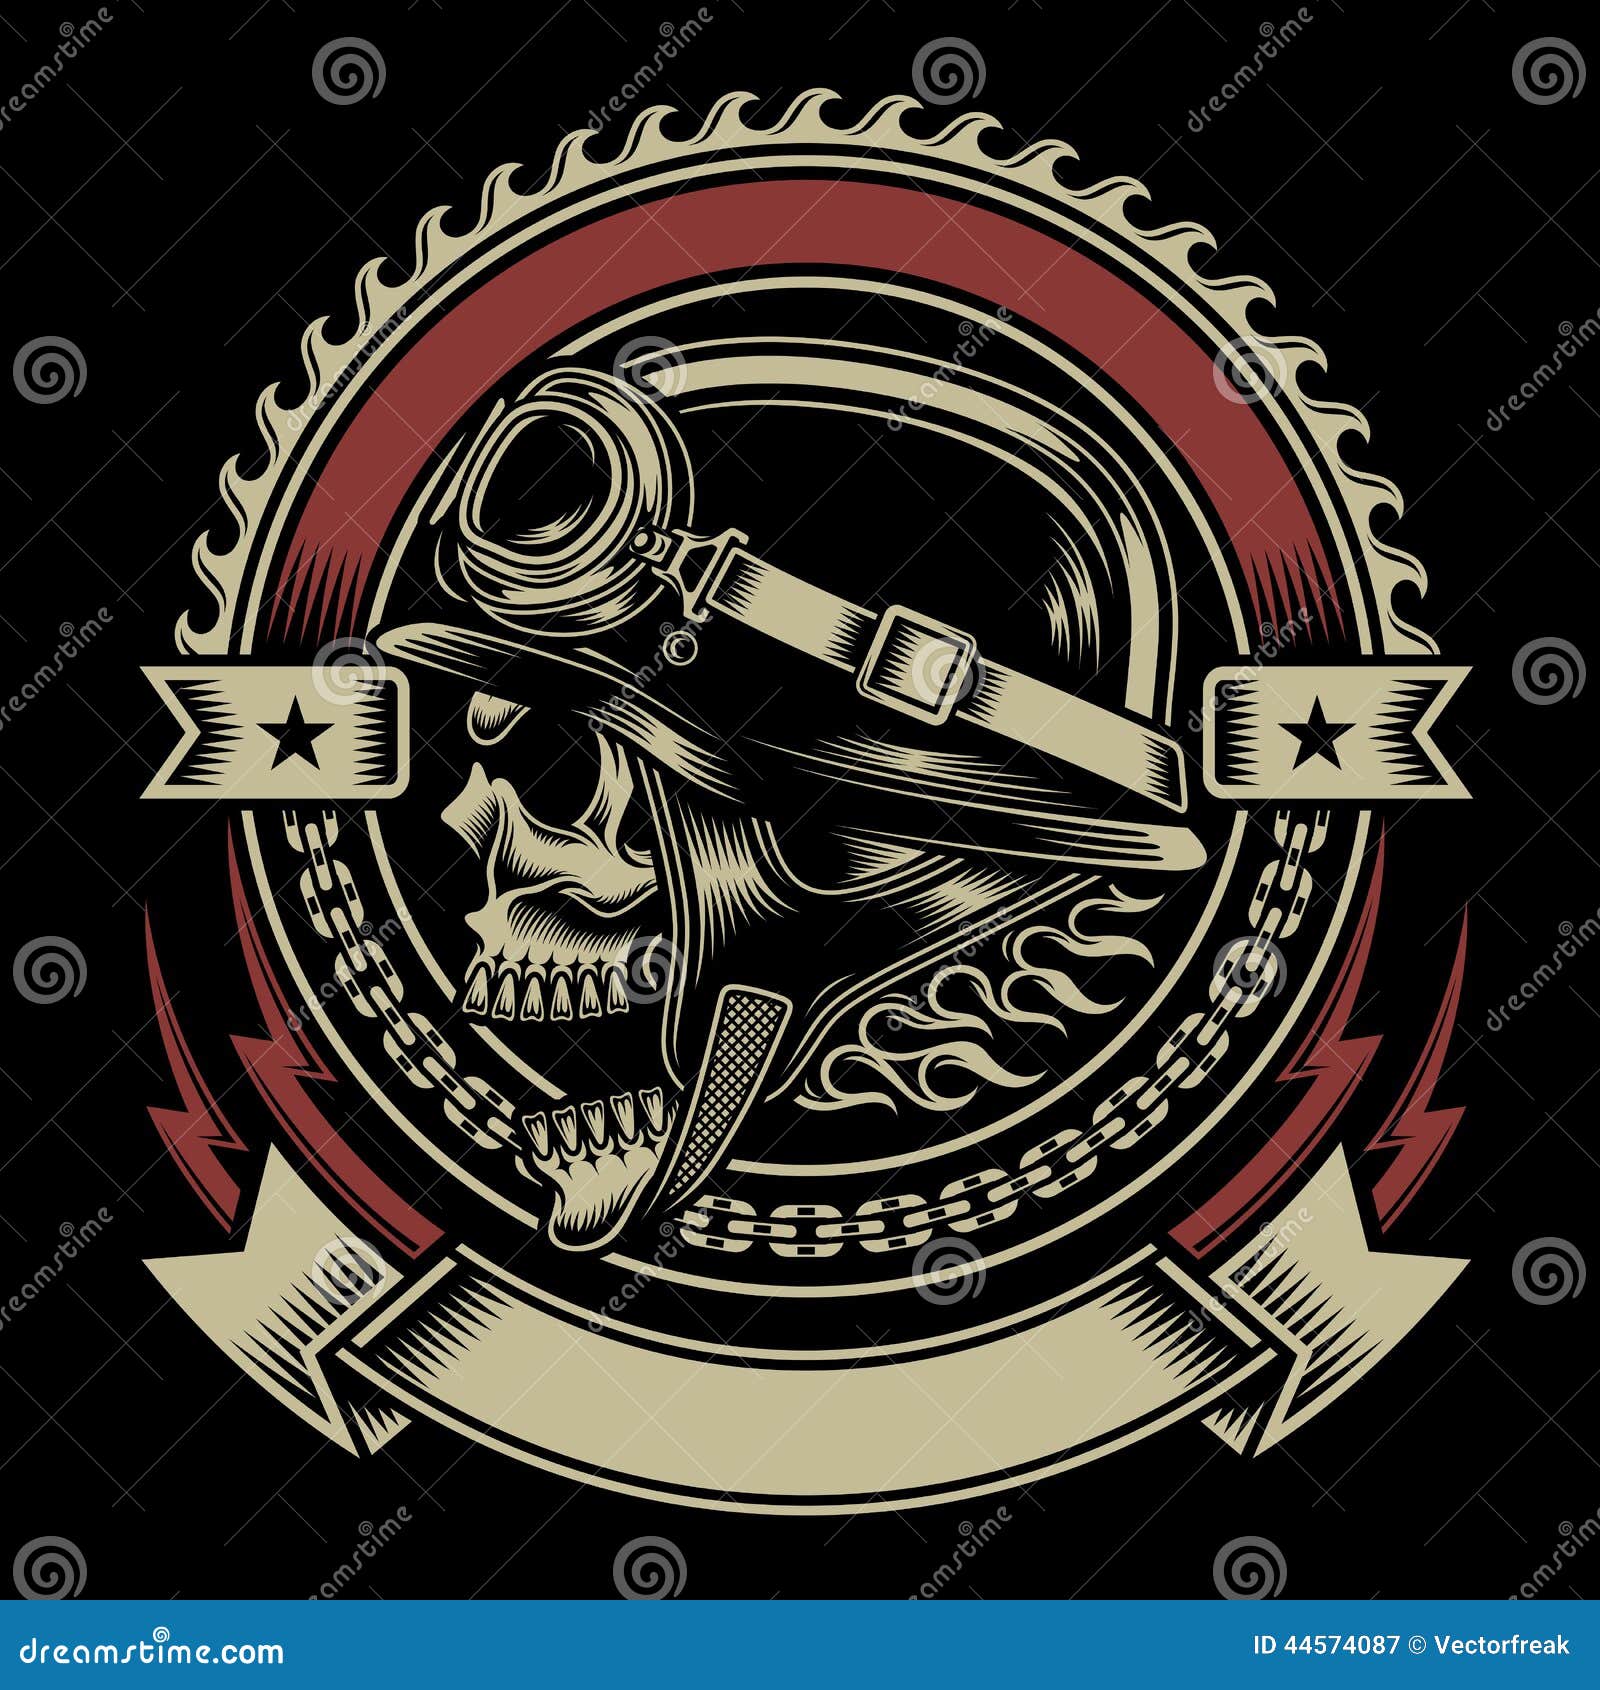 Motorcycle Patch Or Crest